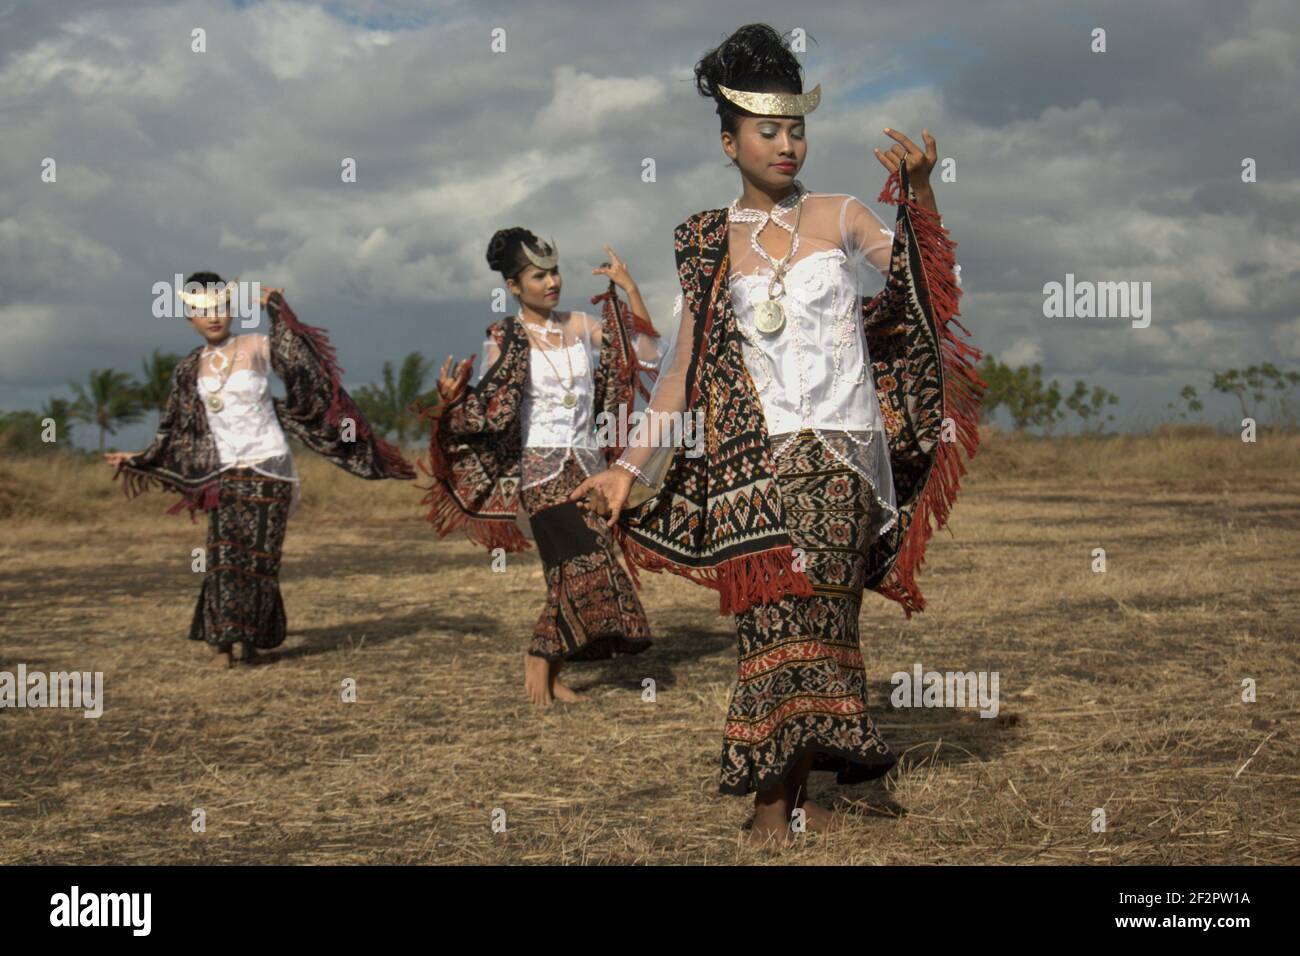 Young women dancing in a rehearsal before a ceremonial event attended by Indonesian officials in Rote Island, Indonesia. Stock Photo